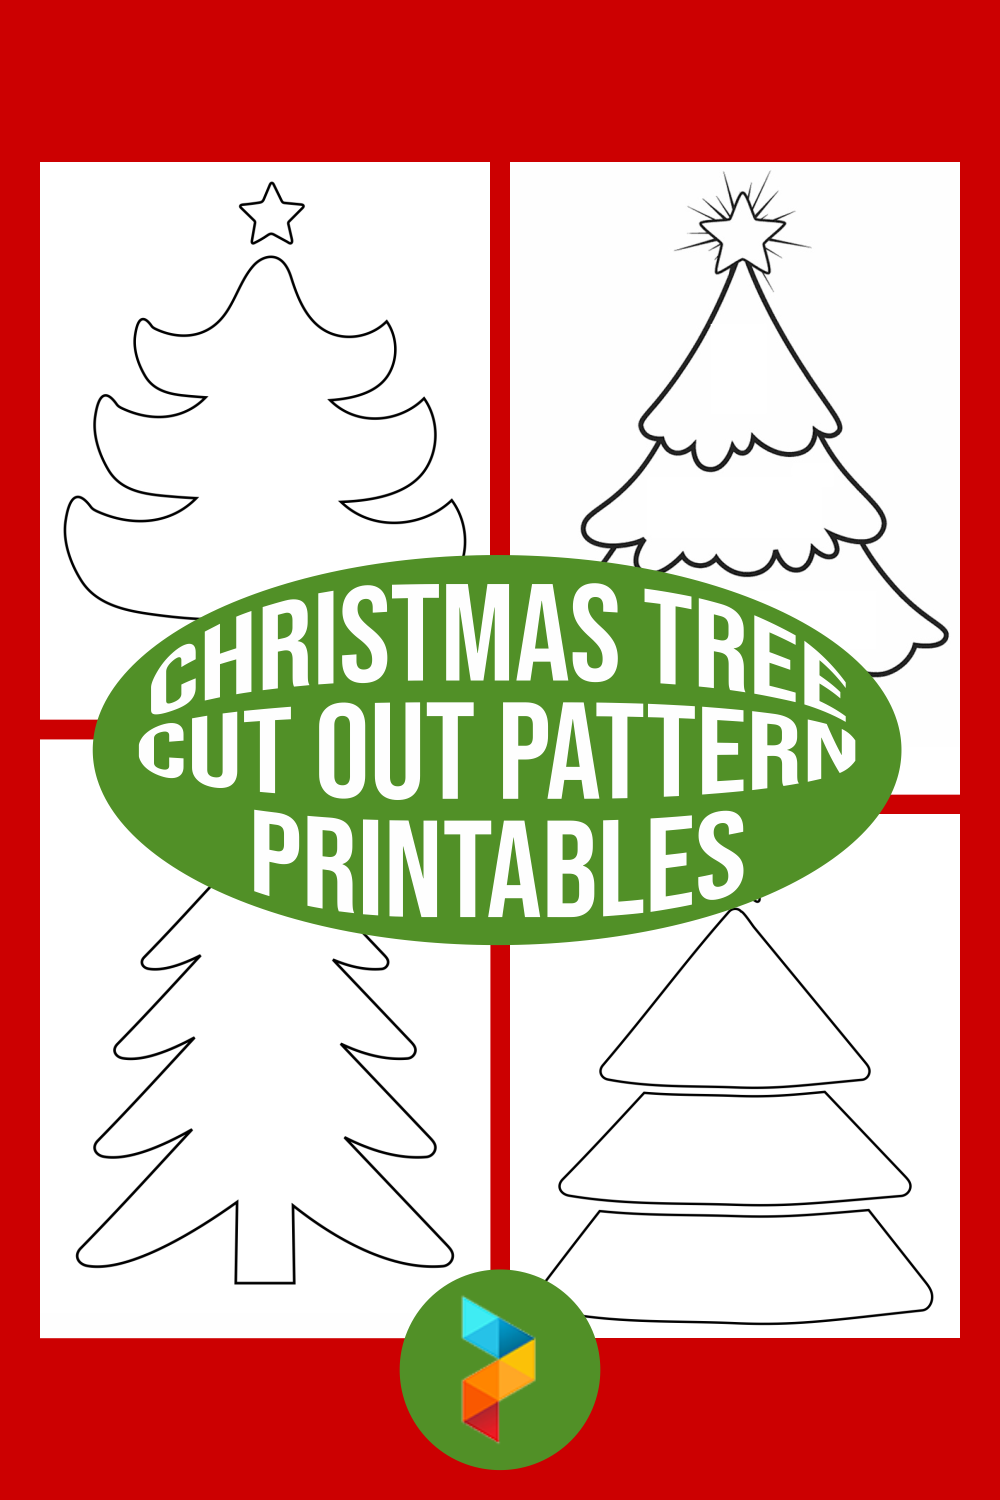 Christmas Tree Cut Out Pattern Printables